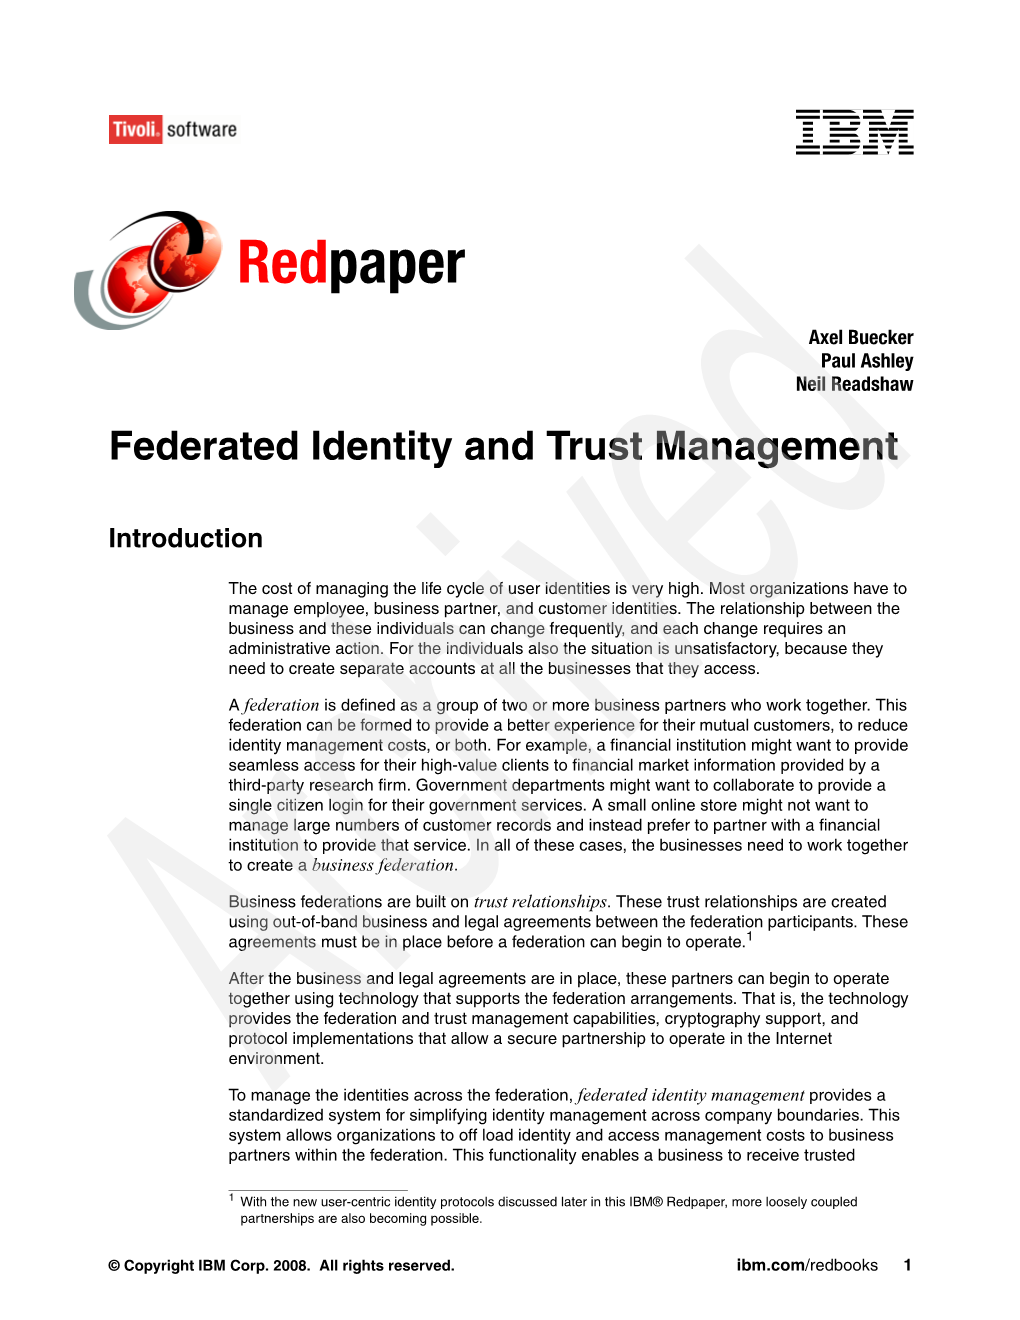 Federated Identity and Trust Management